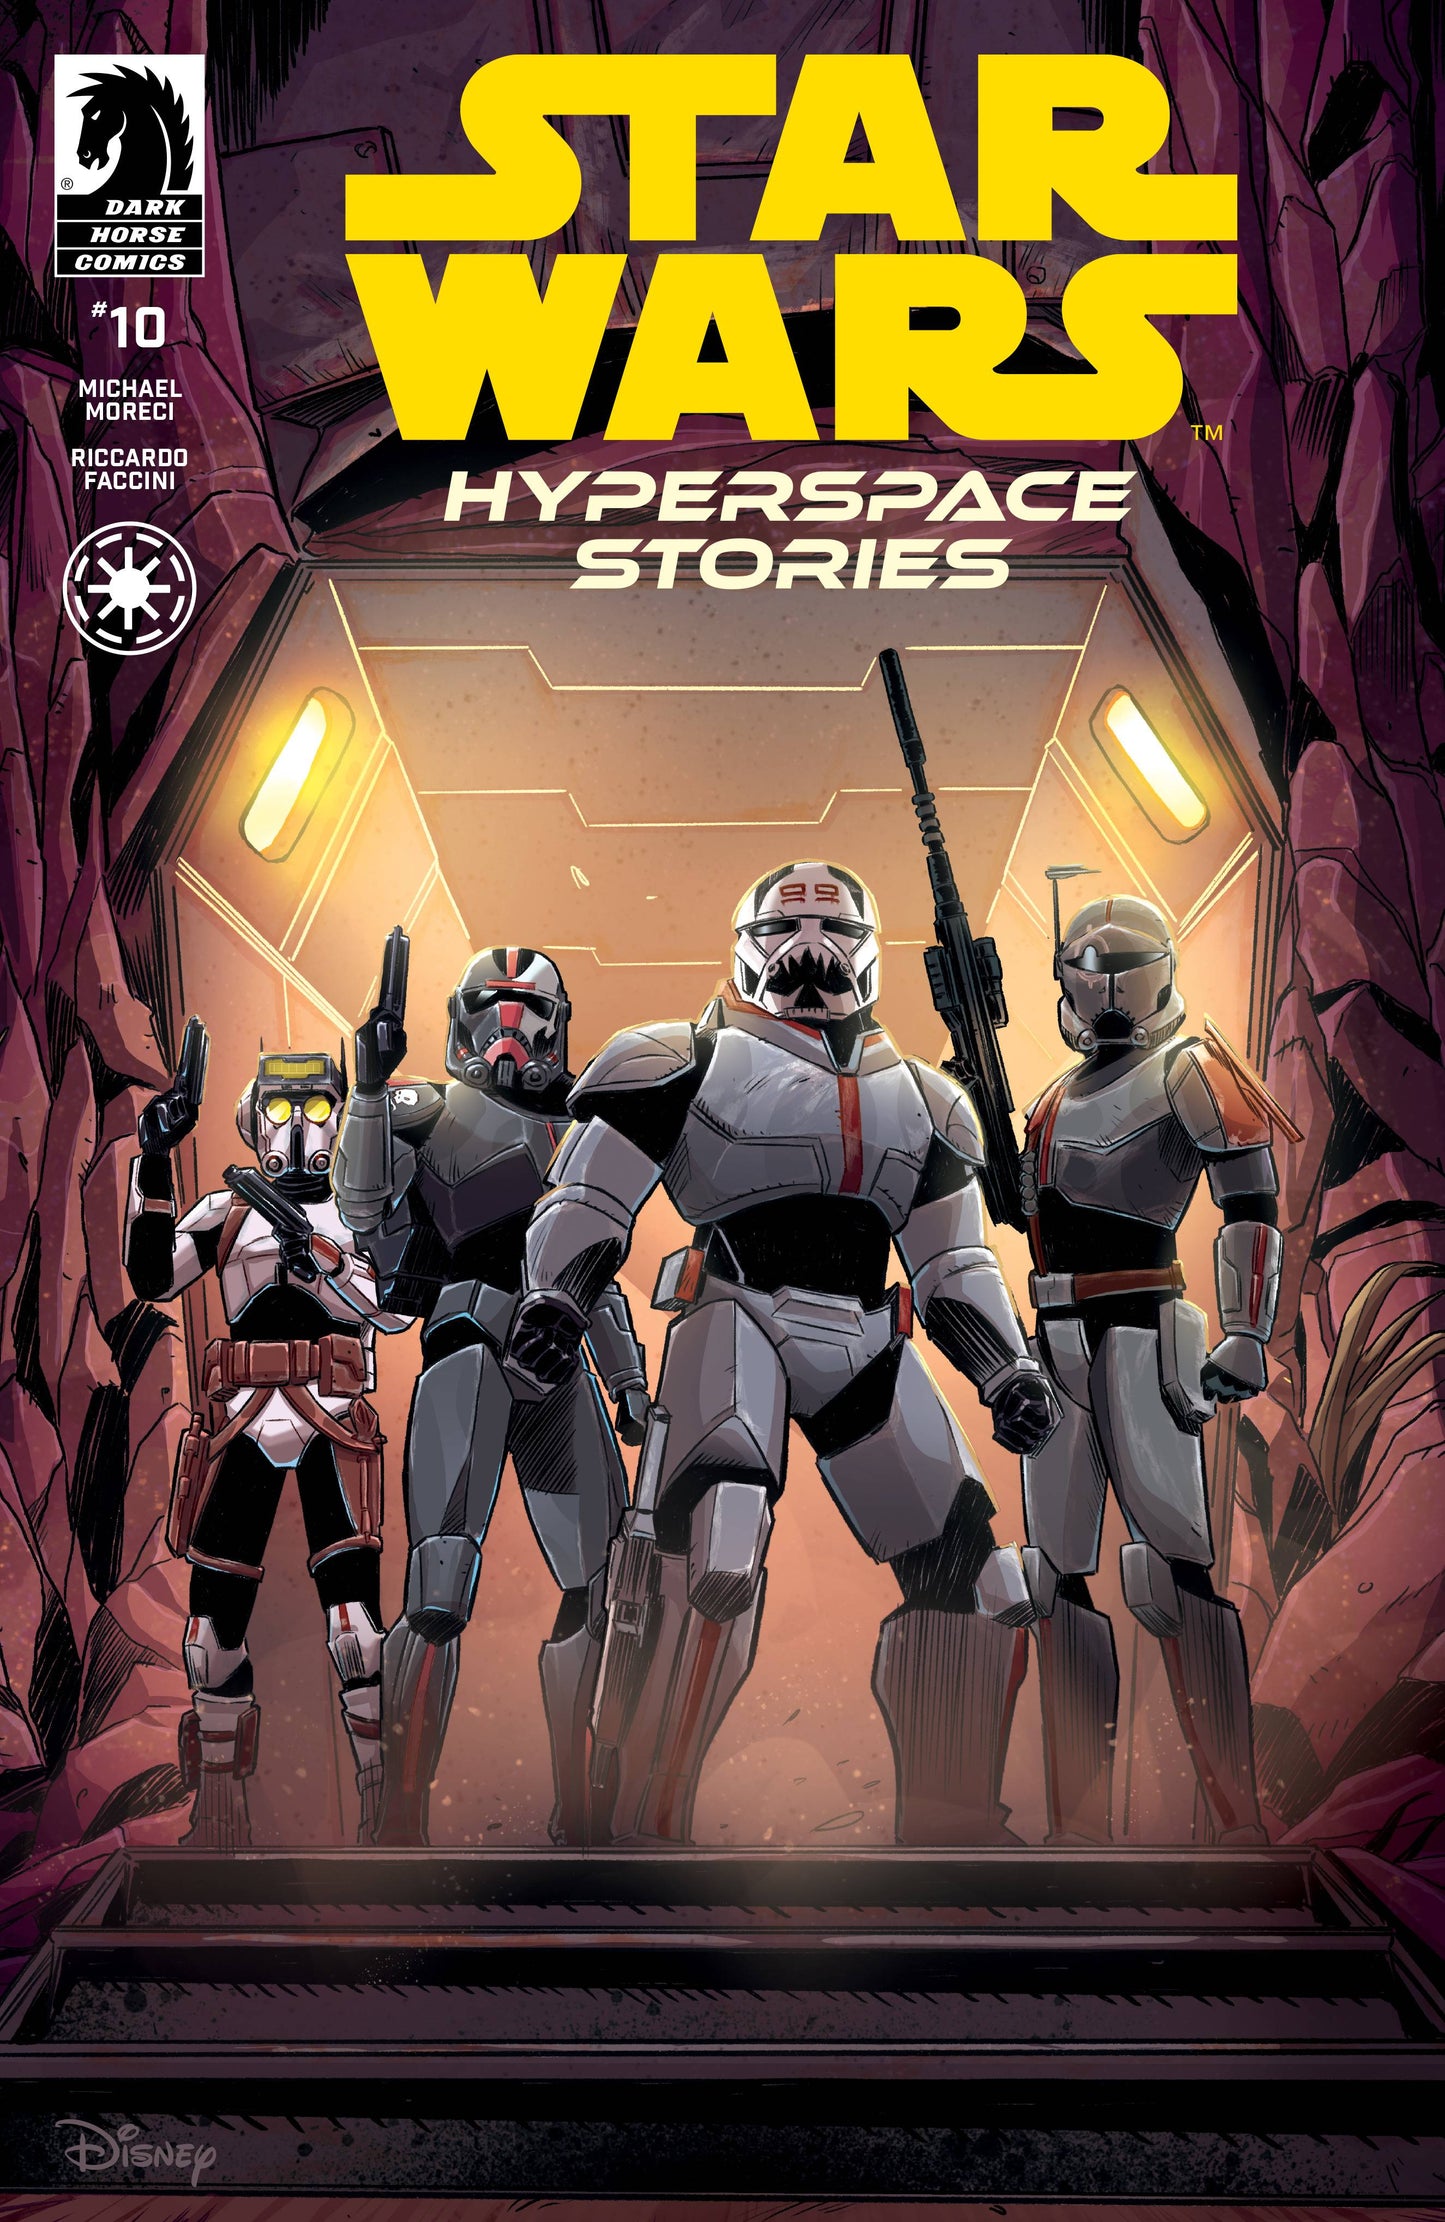 STAR WARS HYPERSPACE STORIES #10 (OF 12) CVR A FOWLER - 1ST APP OF BAD BATCH IN COMICS